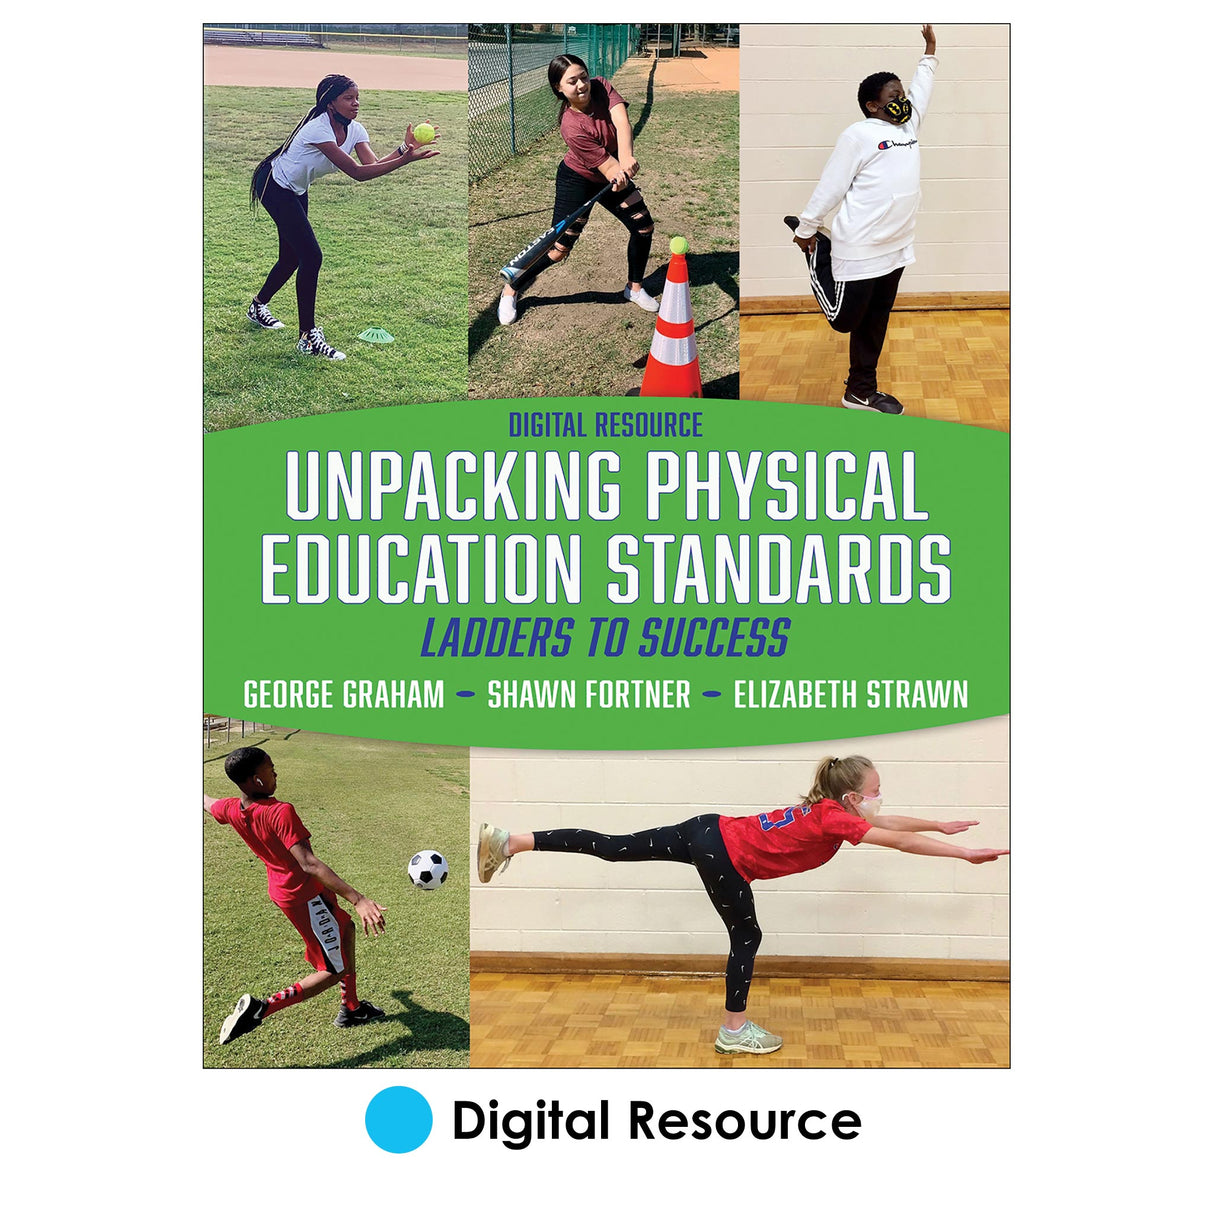 Unpacking Physical Education Standards Digital Resource